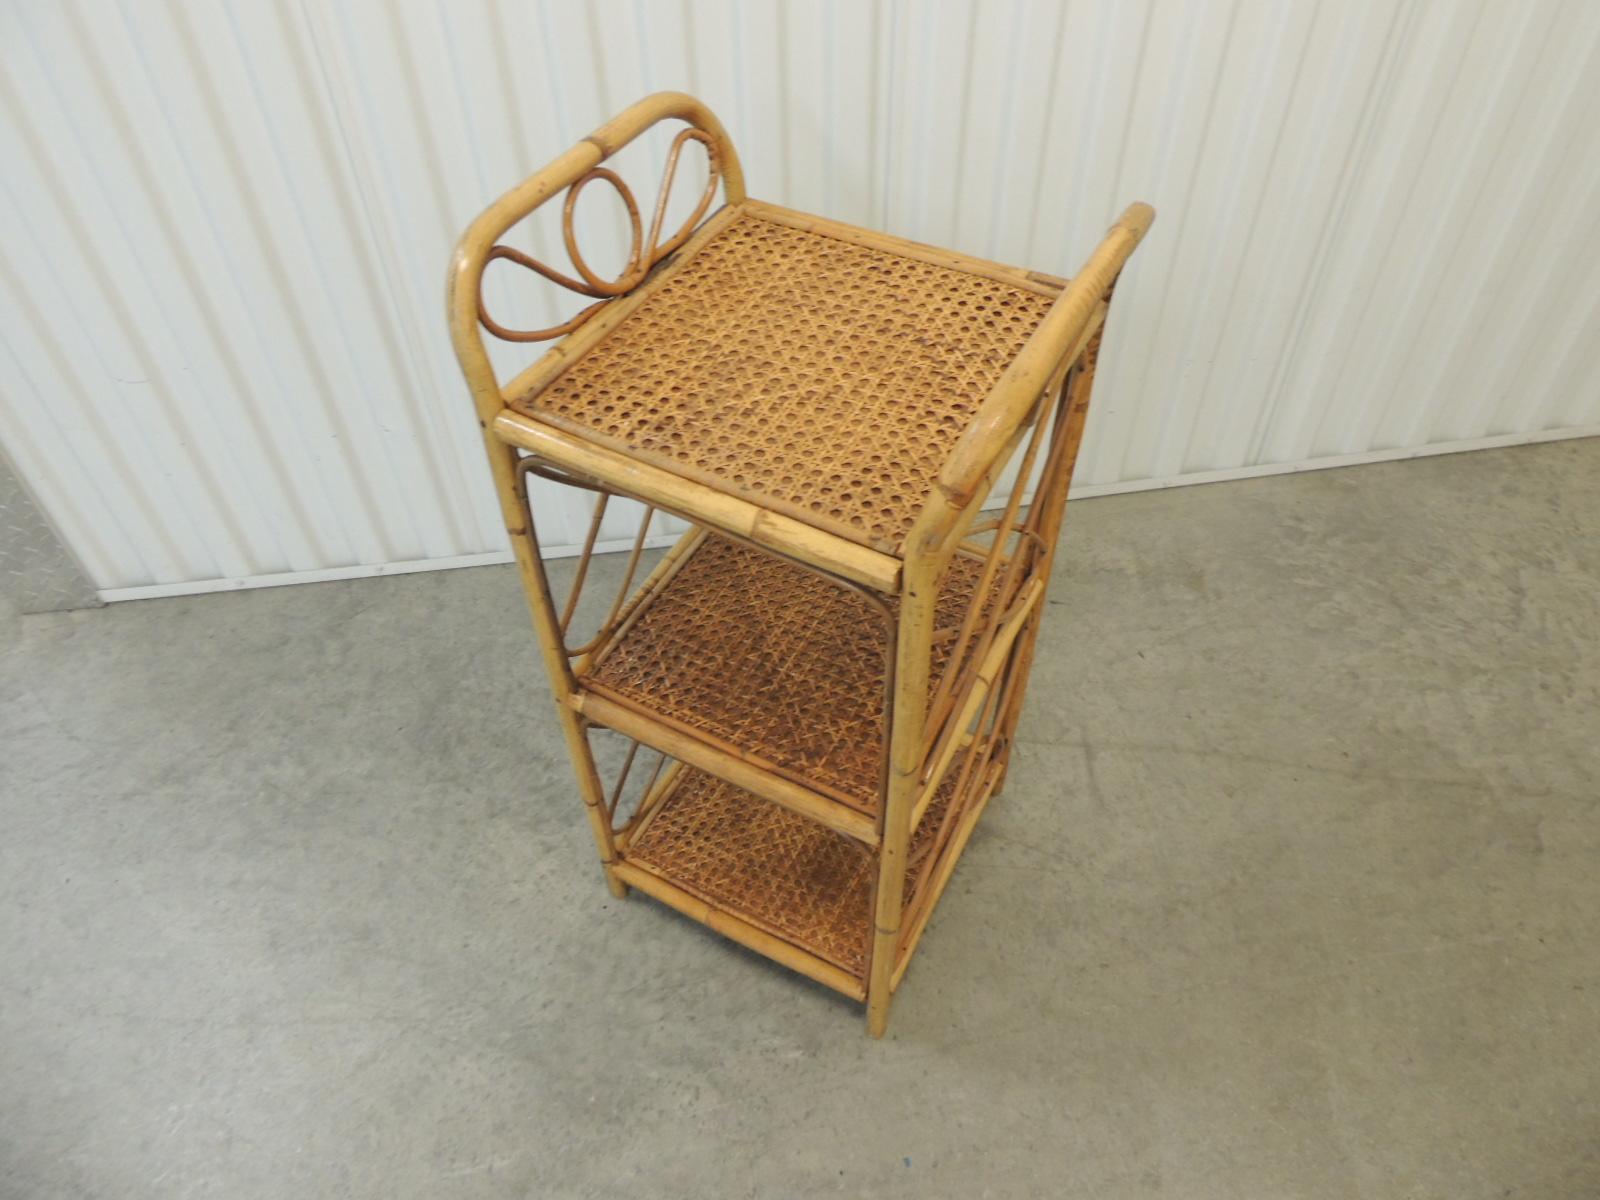 Vintage square bamboo étagère.
Square shelves with lattice design sides and rounded top handles.
Rattan woven details on the shelves.
Measures: 12 x 12 x 27.5 H.